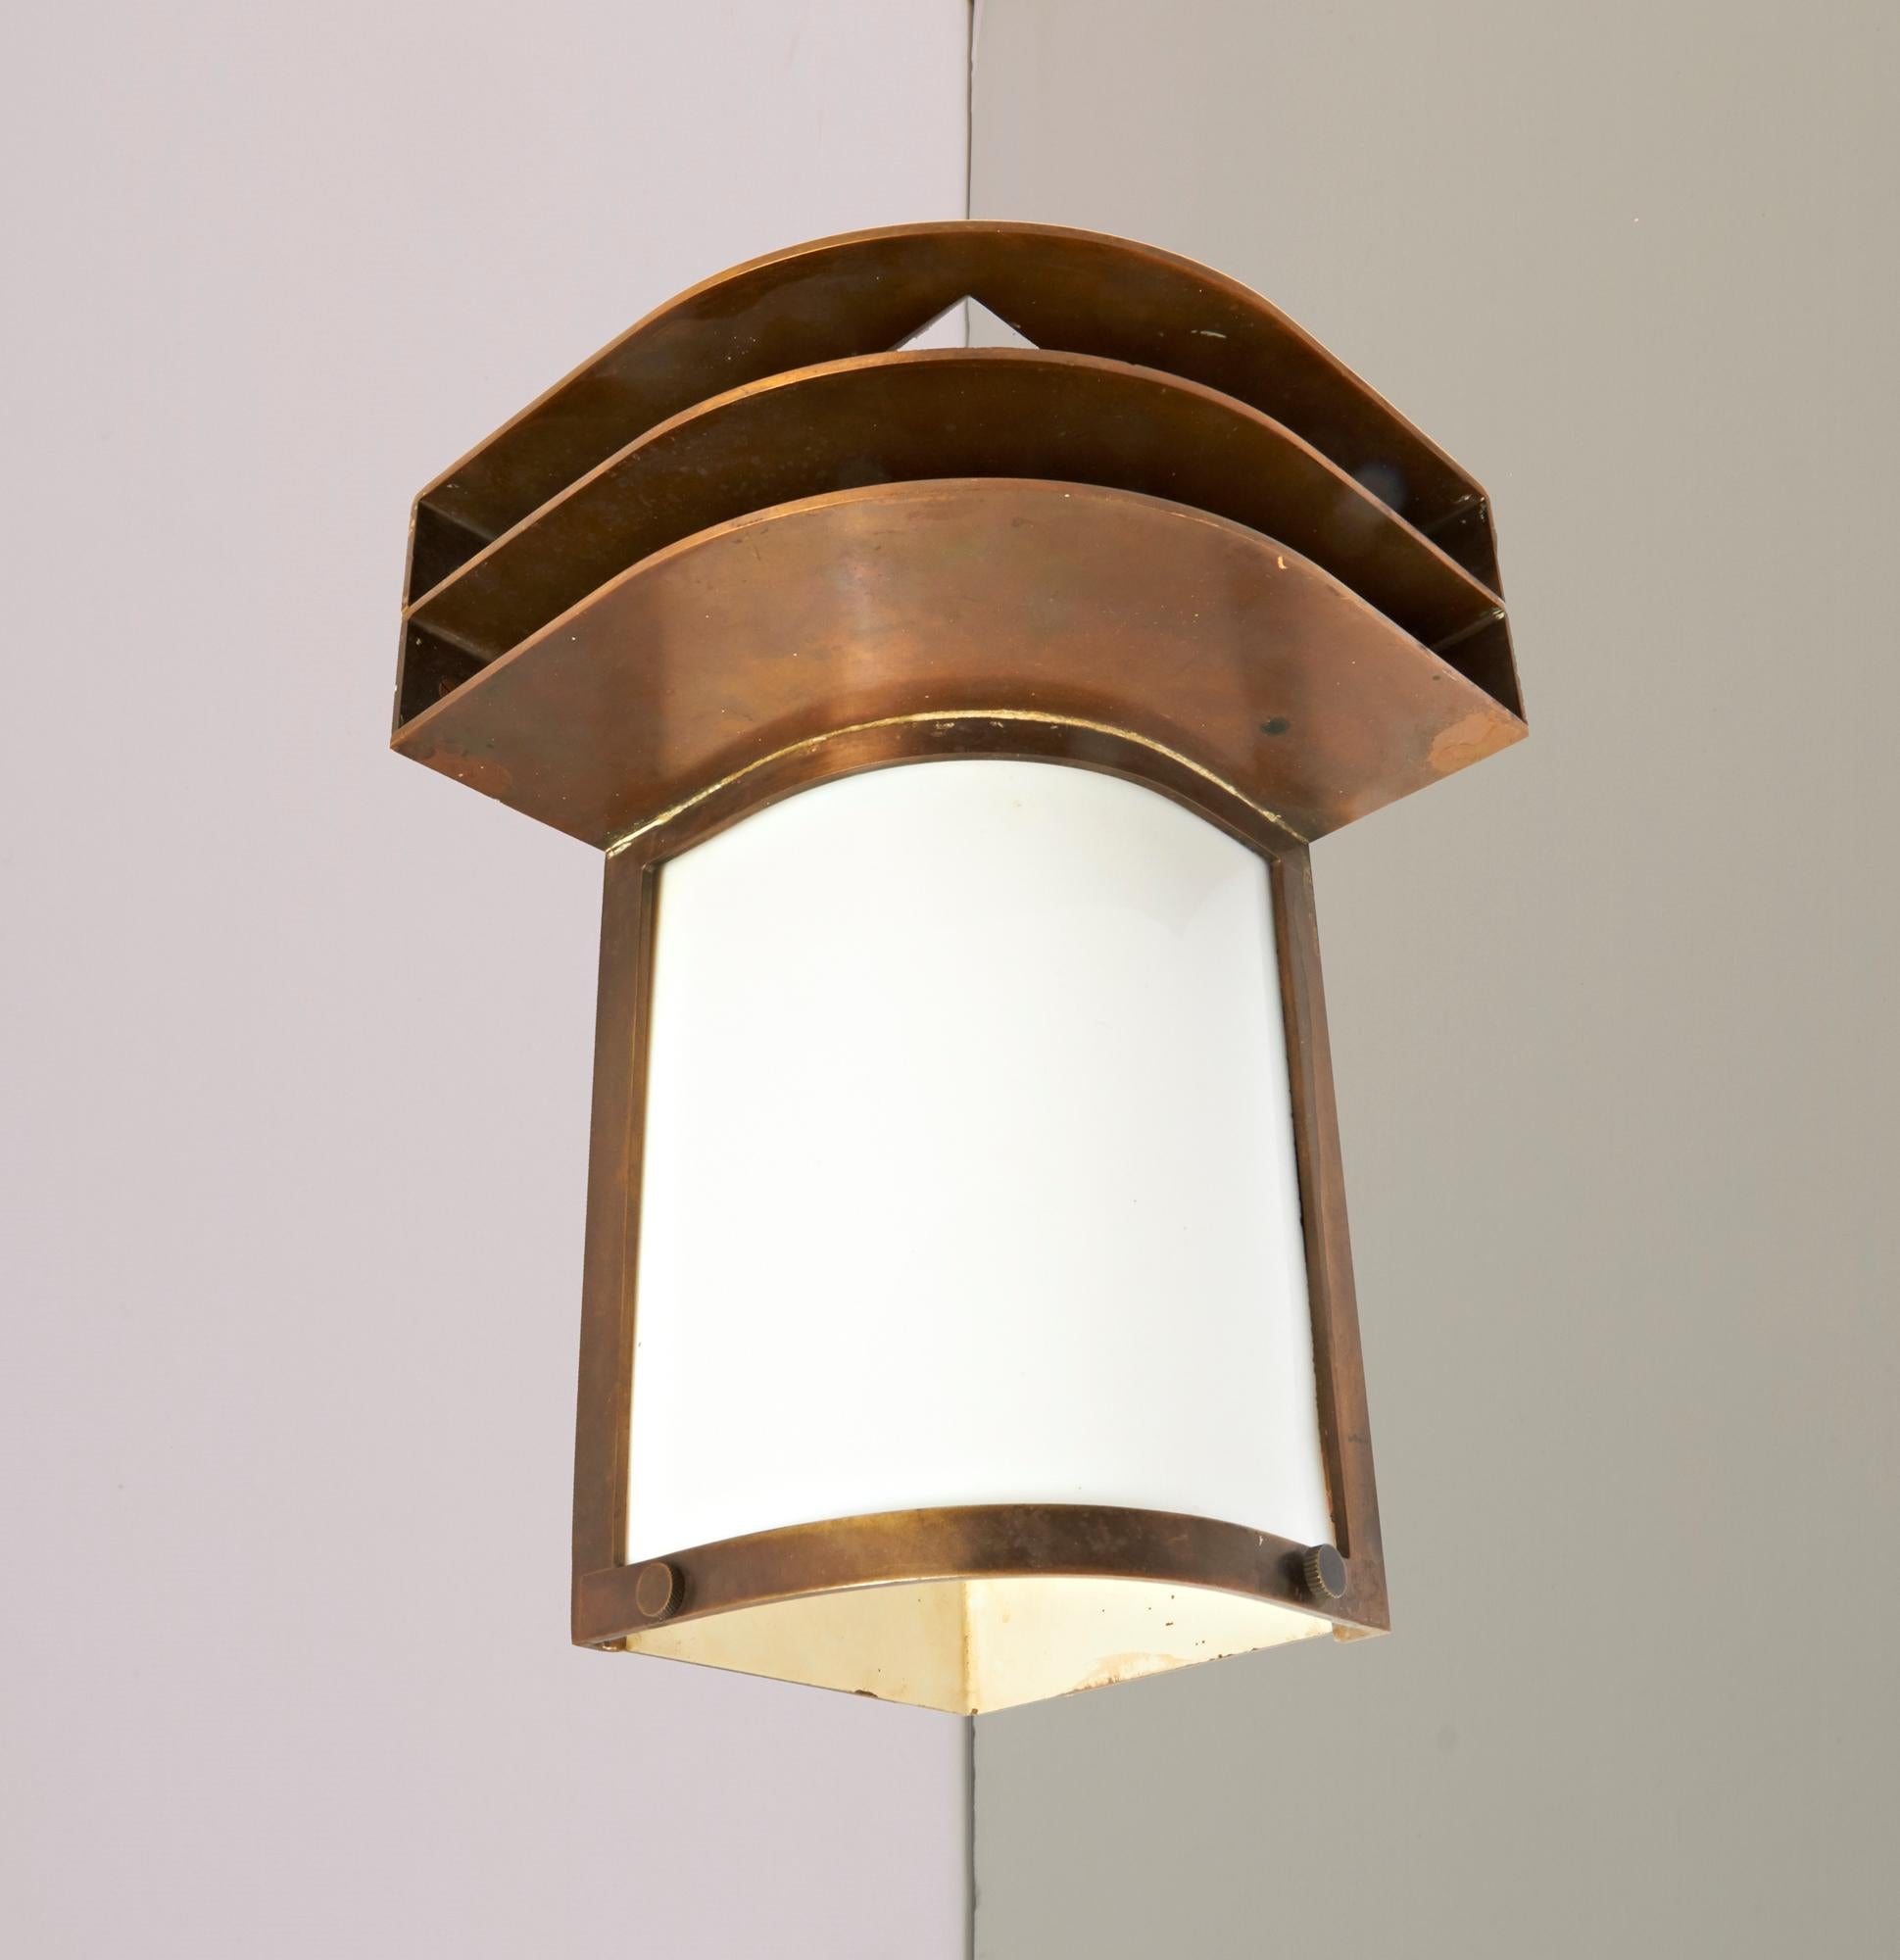 This spectacular American Art Deco/Machine Age is a real statement piece. It is a solid bronze wall sconce designed to be mounted in a corner with the light emanating from a curved milk glass panel inset at the front and additional light shining